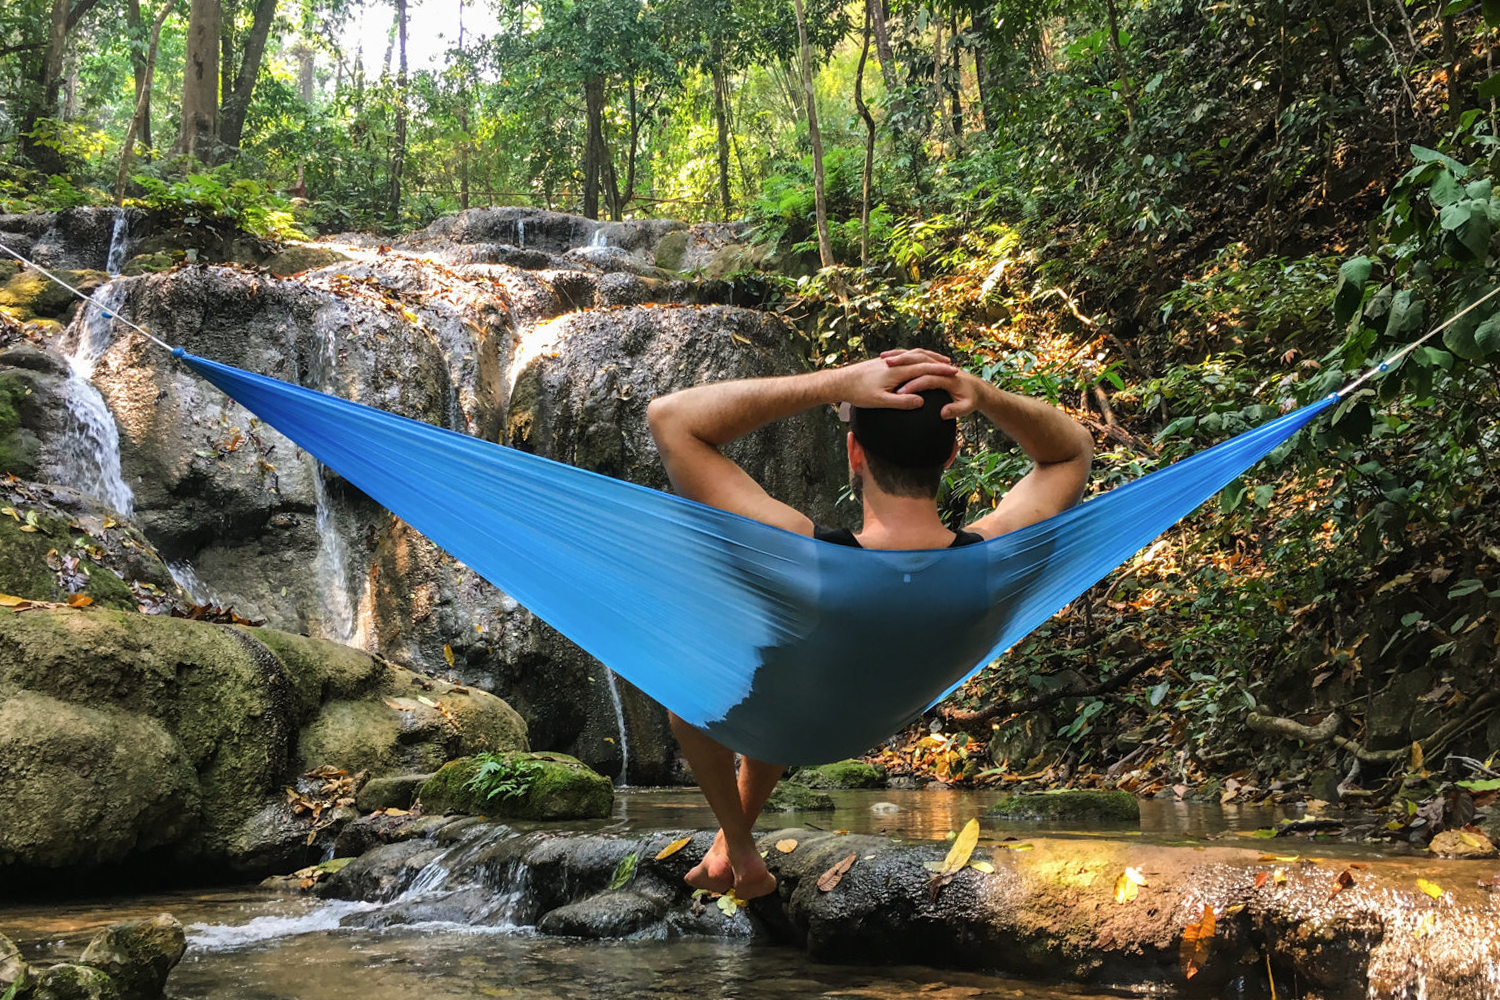 A hiker relaxing in front of a secluded waterfall in Hawaii in the Hummingbird Single hammock